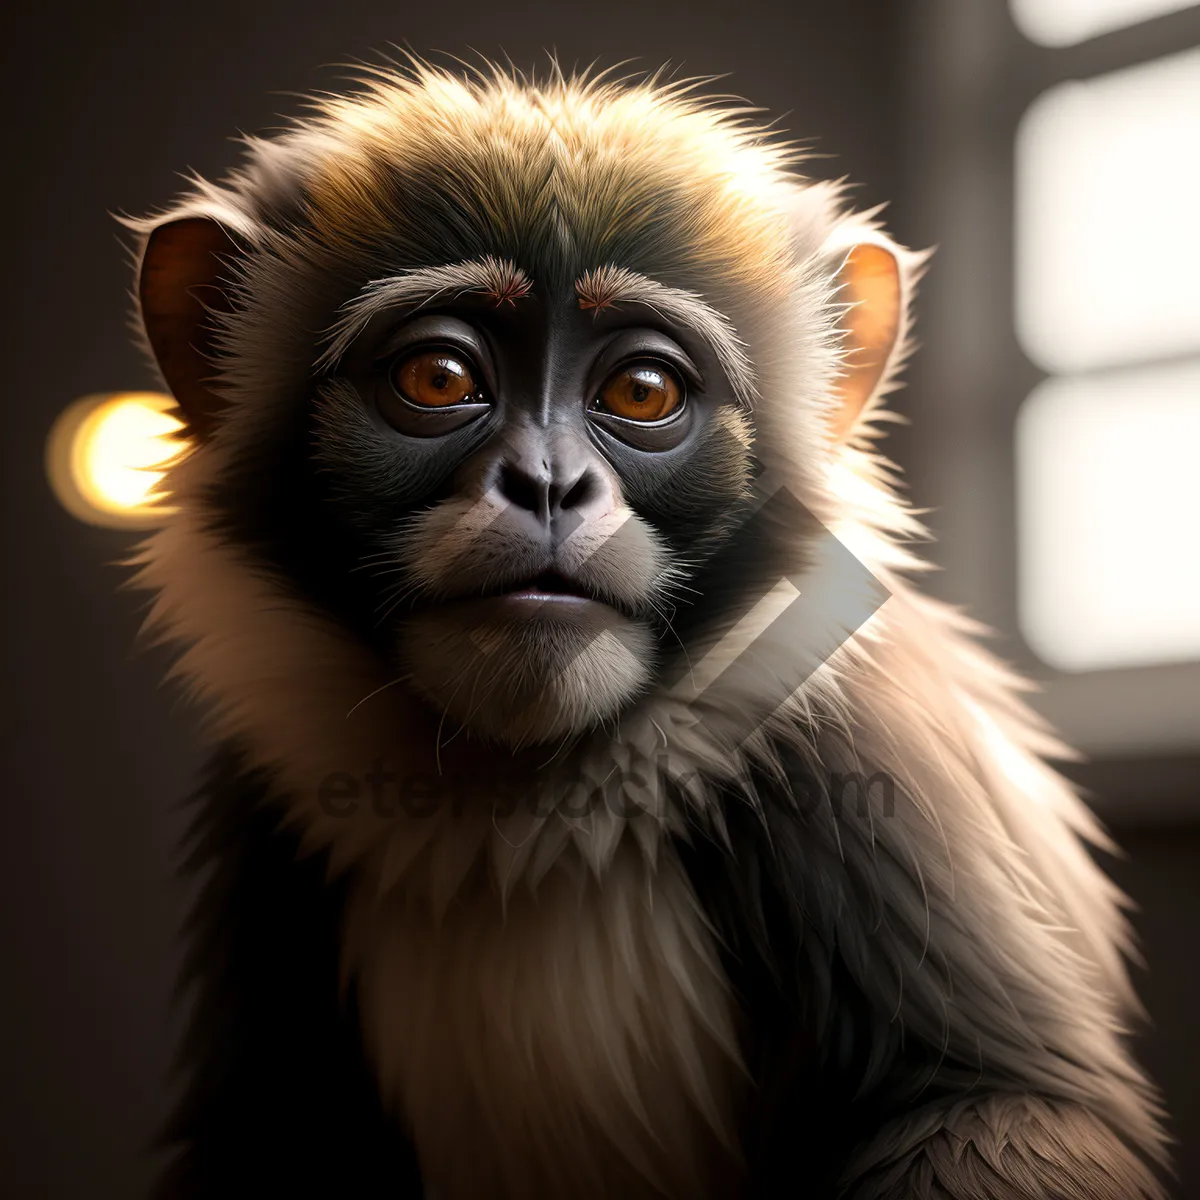 Picture of Furry Primate with Cute Eyes in the Wild